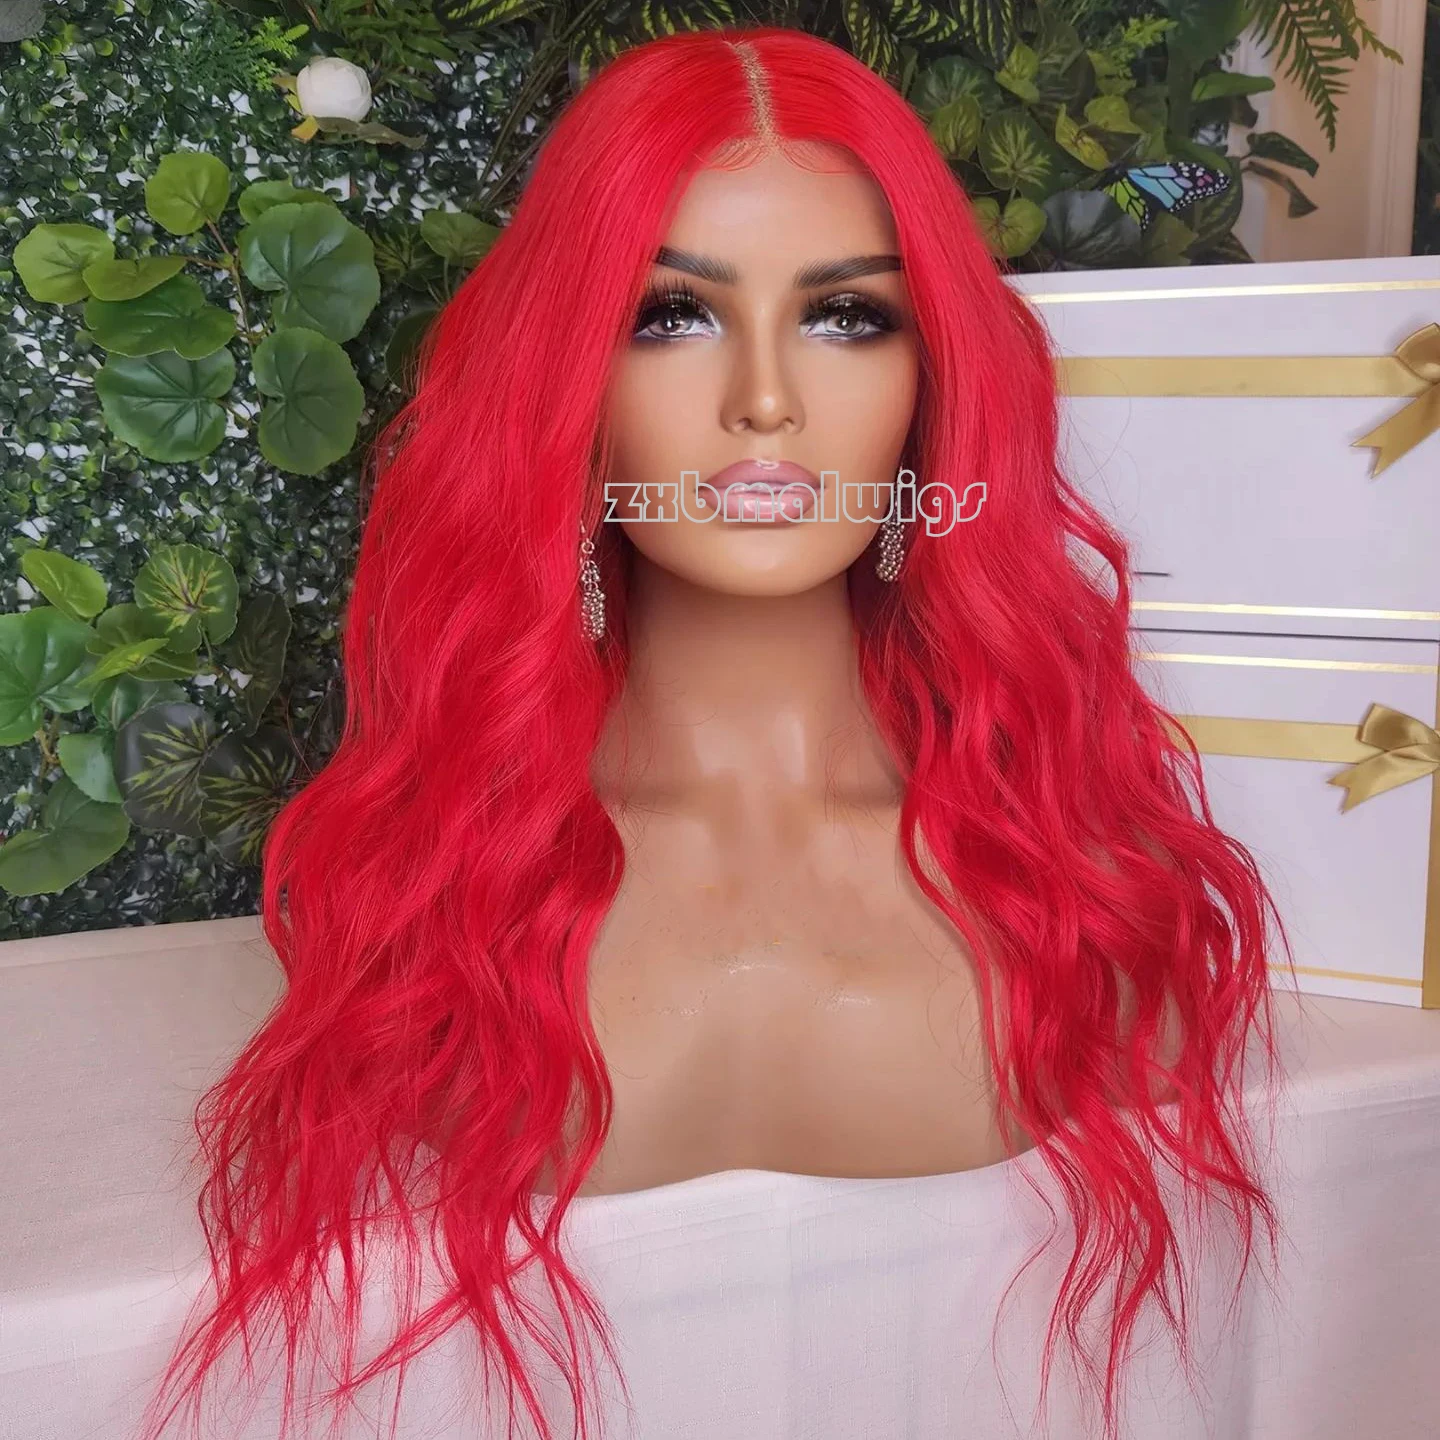 

Wavy Long Body Wave Red Hair Synthetic Lace Front Wigs Glueless Preplucked Heat Resistant Natural Hairline Cosplay Daily Wig